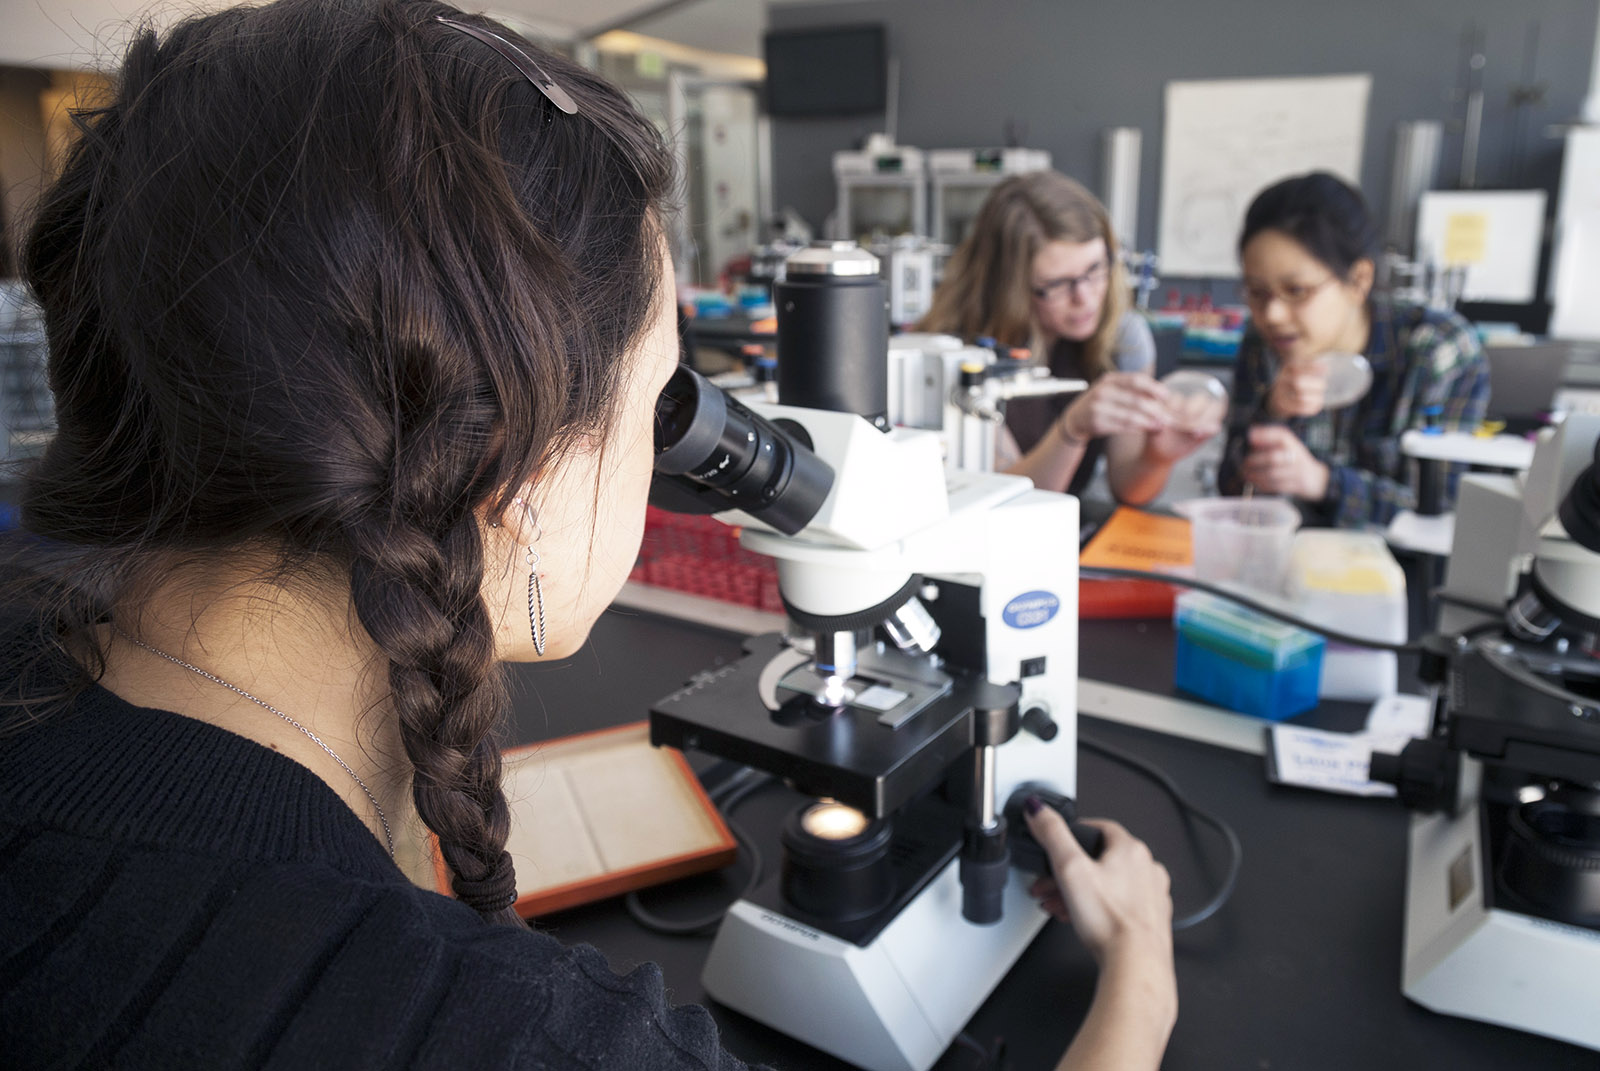 Bard students in the laboratory during Citizen Science. Photo by Pete Mauney '93 MFA '00.